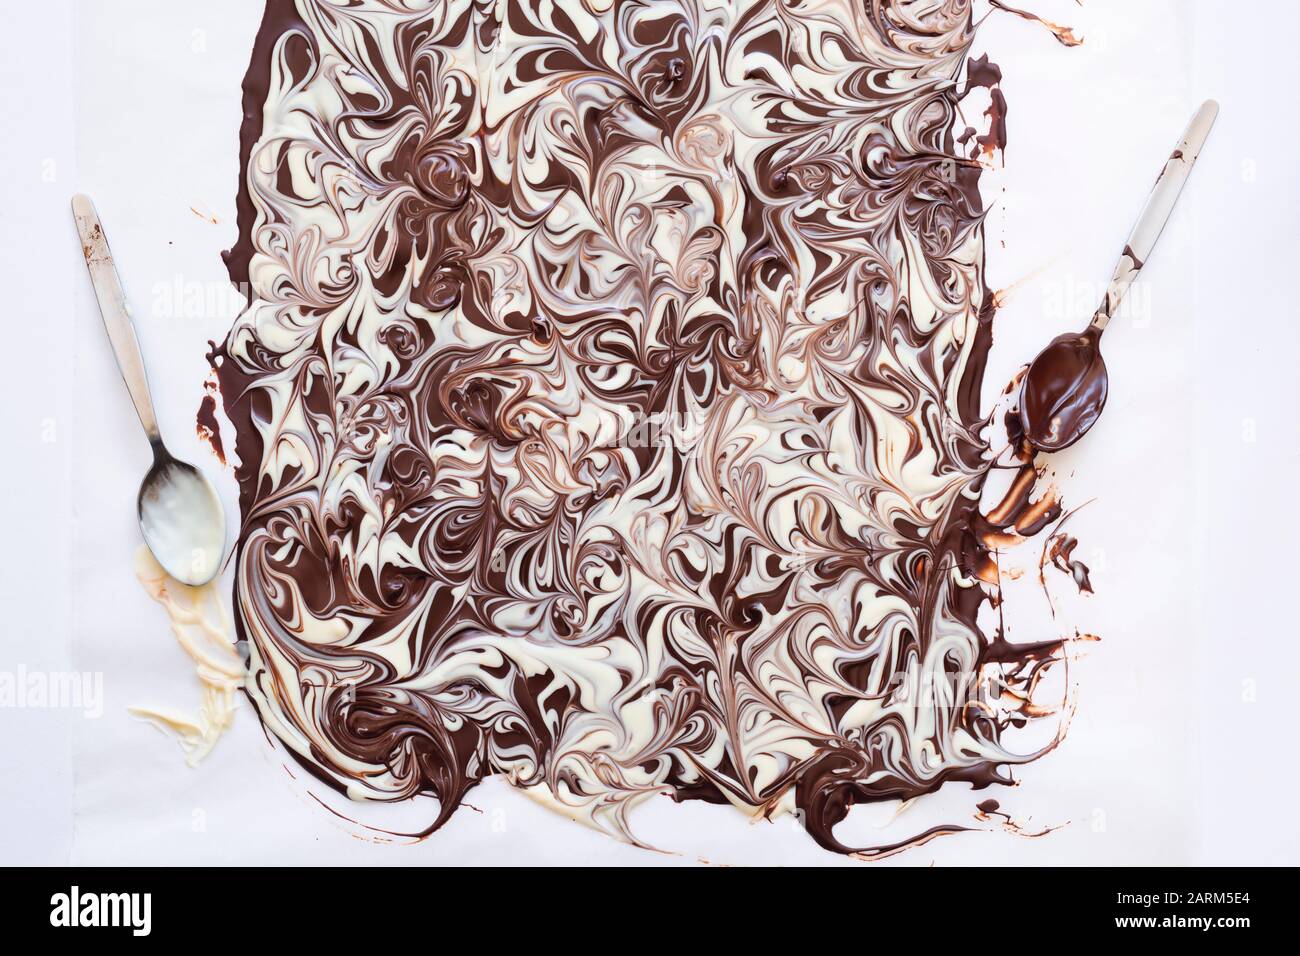 Chocolate marbling on a baking sheet with spoons Stock Photo